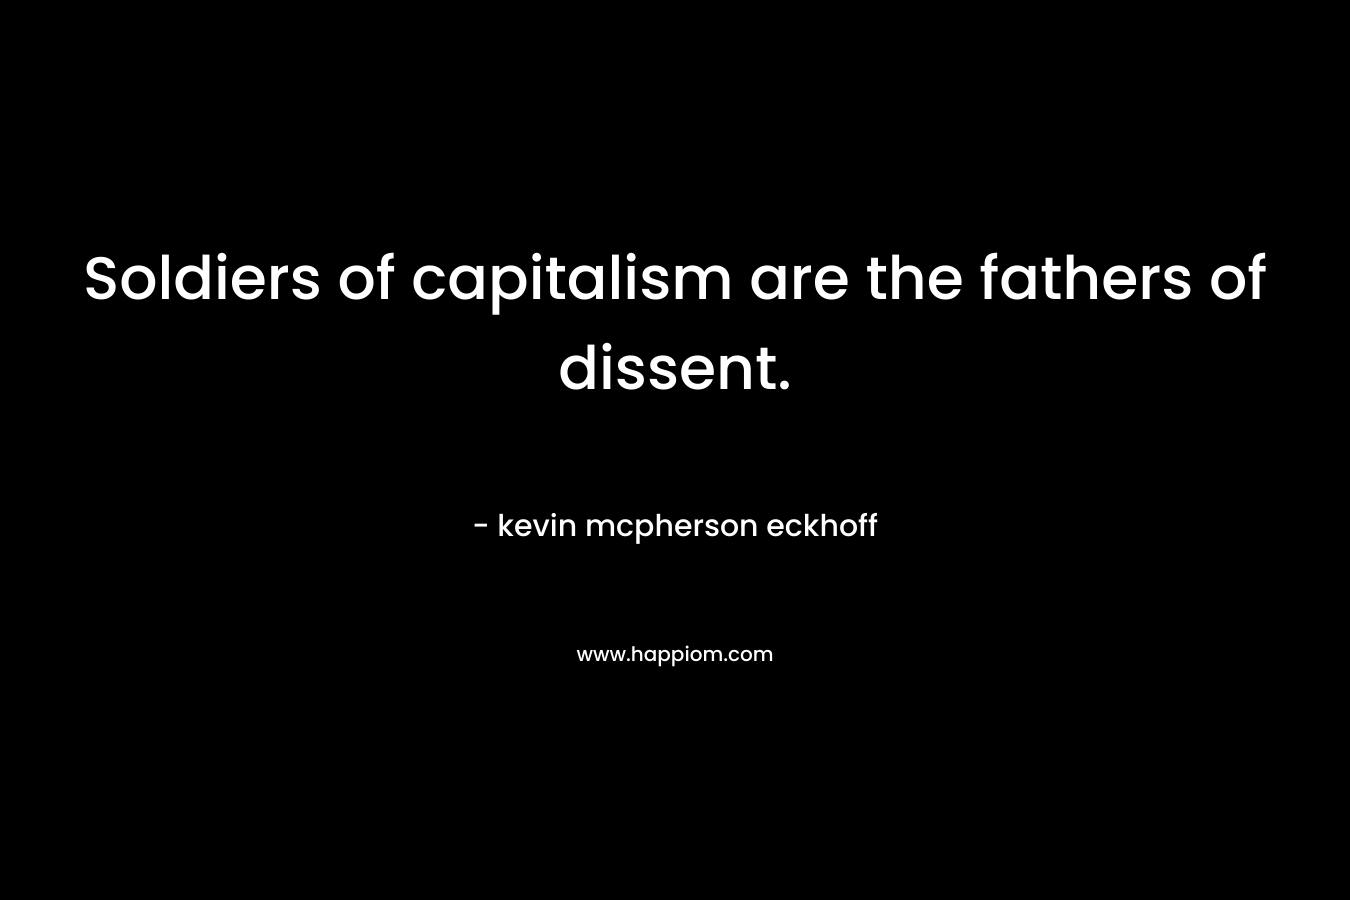 Soldiers of capitalism are the fathers of dissent. – kevin mcpherson eckhoff